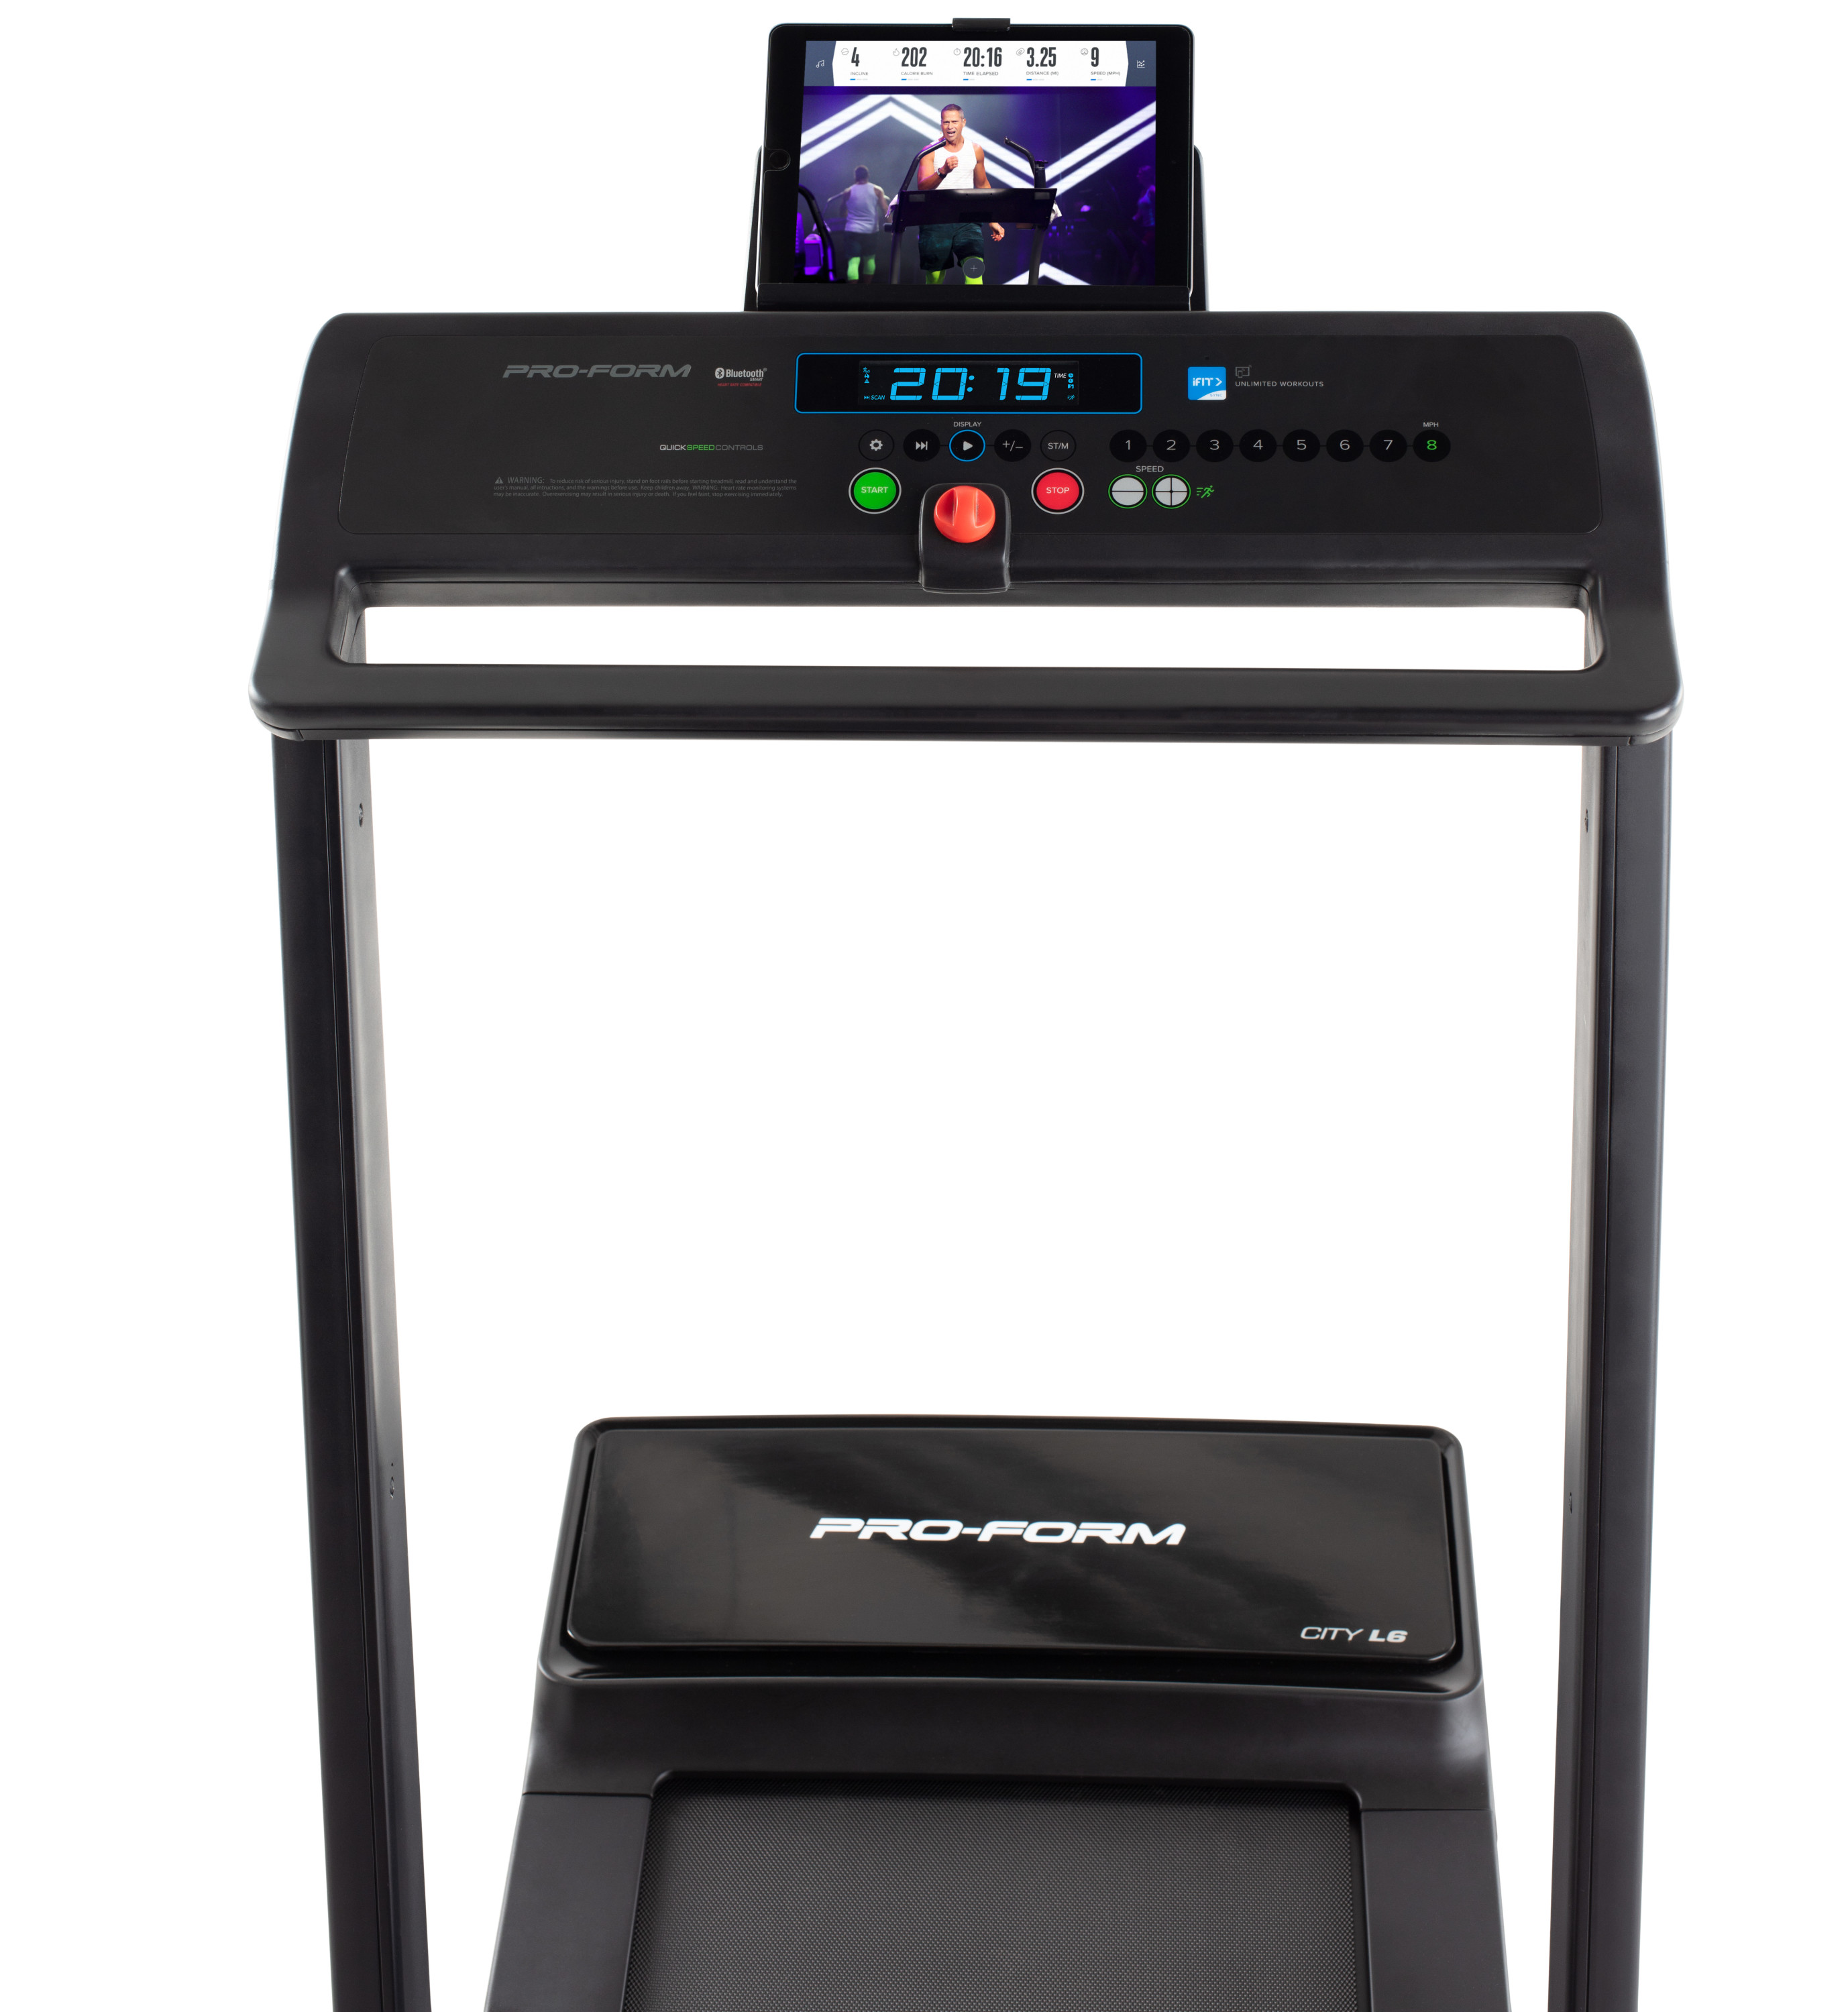 ProForm City L6 Folding Exercise Treadmill with Automatic Trainer Control - image 5 of 13